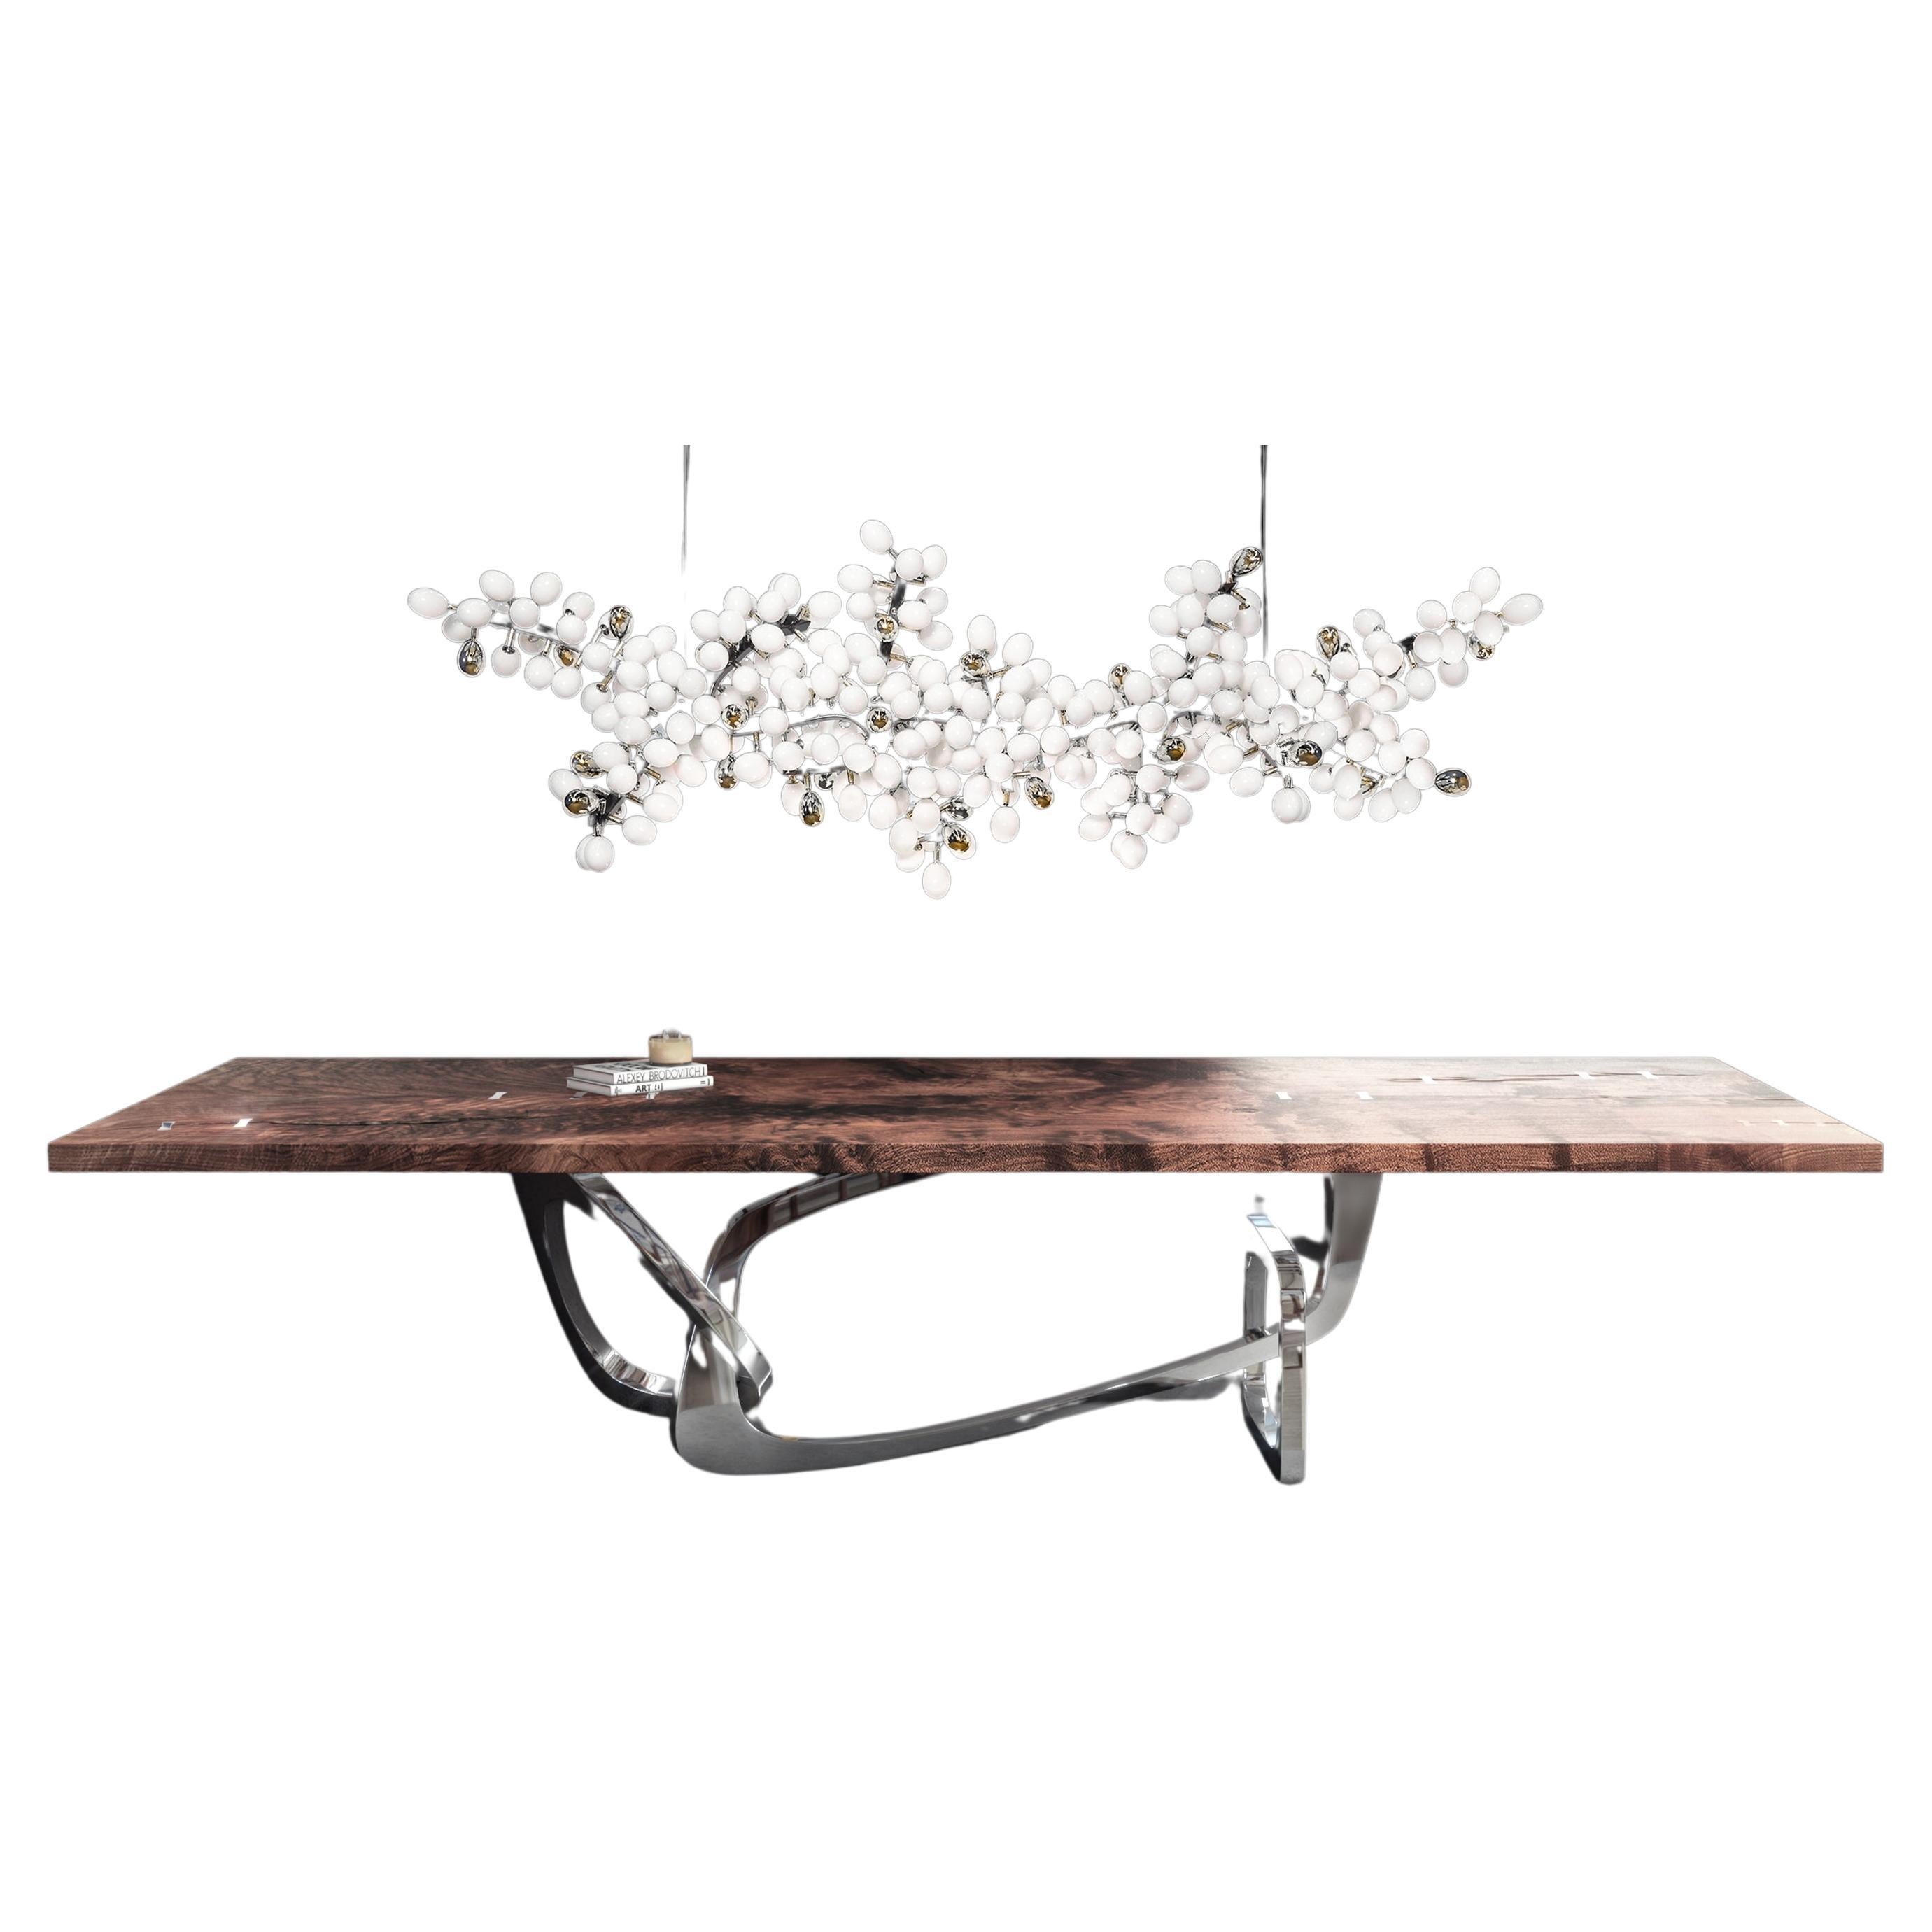 The Bangle dining table by Barlas Baylar is a contemporary interpretation of Art Deco design inspiration by utilizing rigorous craft.  The sculptural Stainless Steel base and Seamed Walnut top  is available in a variety of finishes.  The top can be